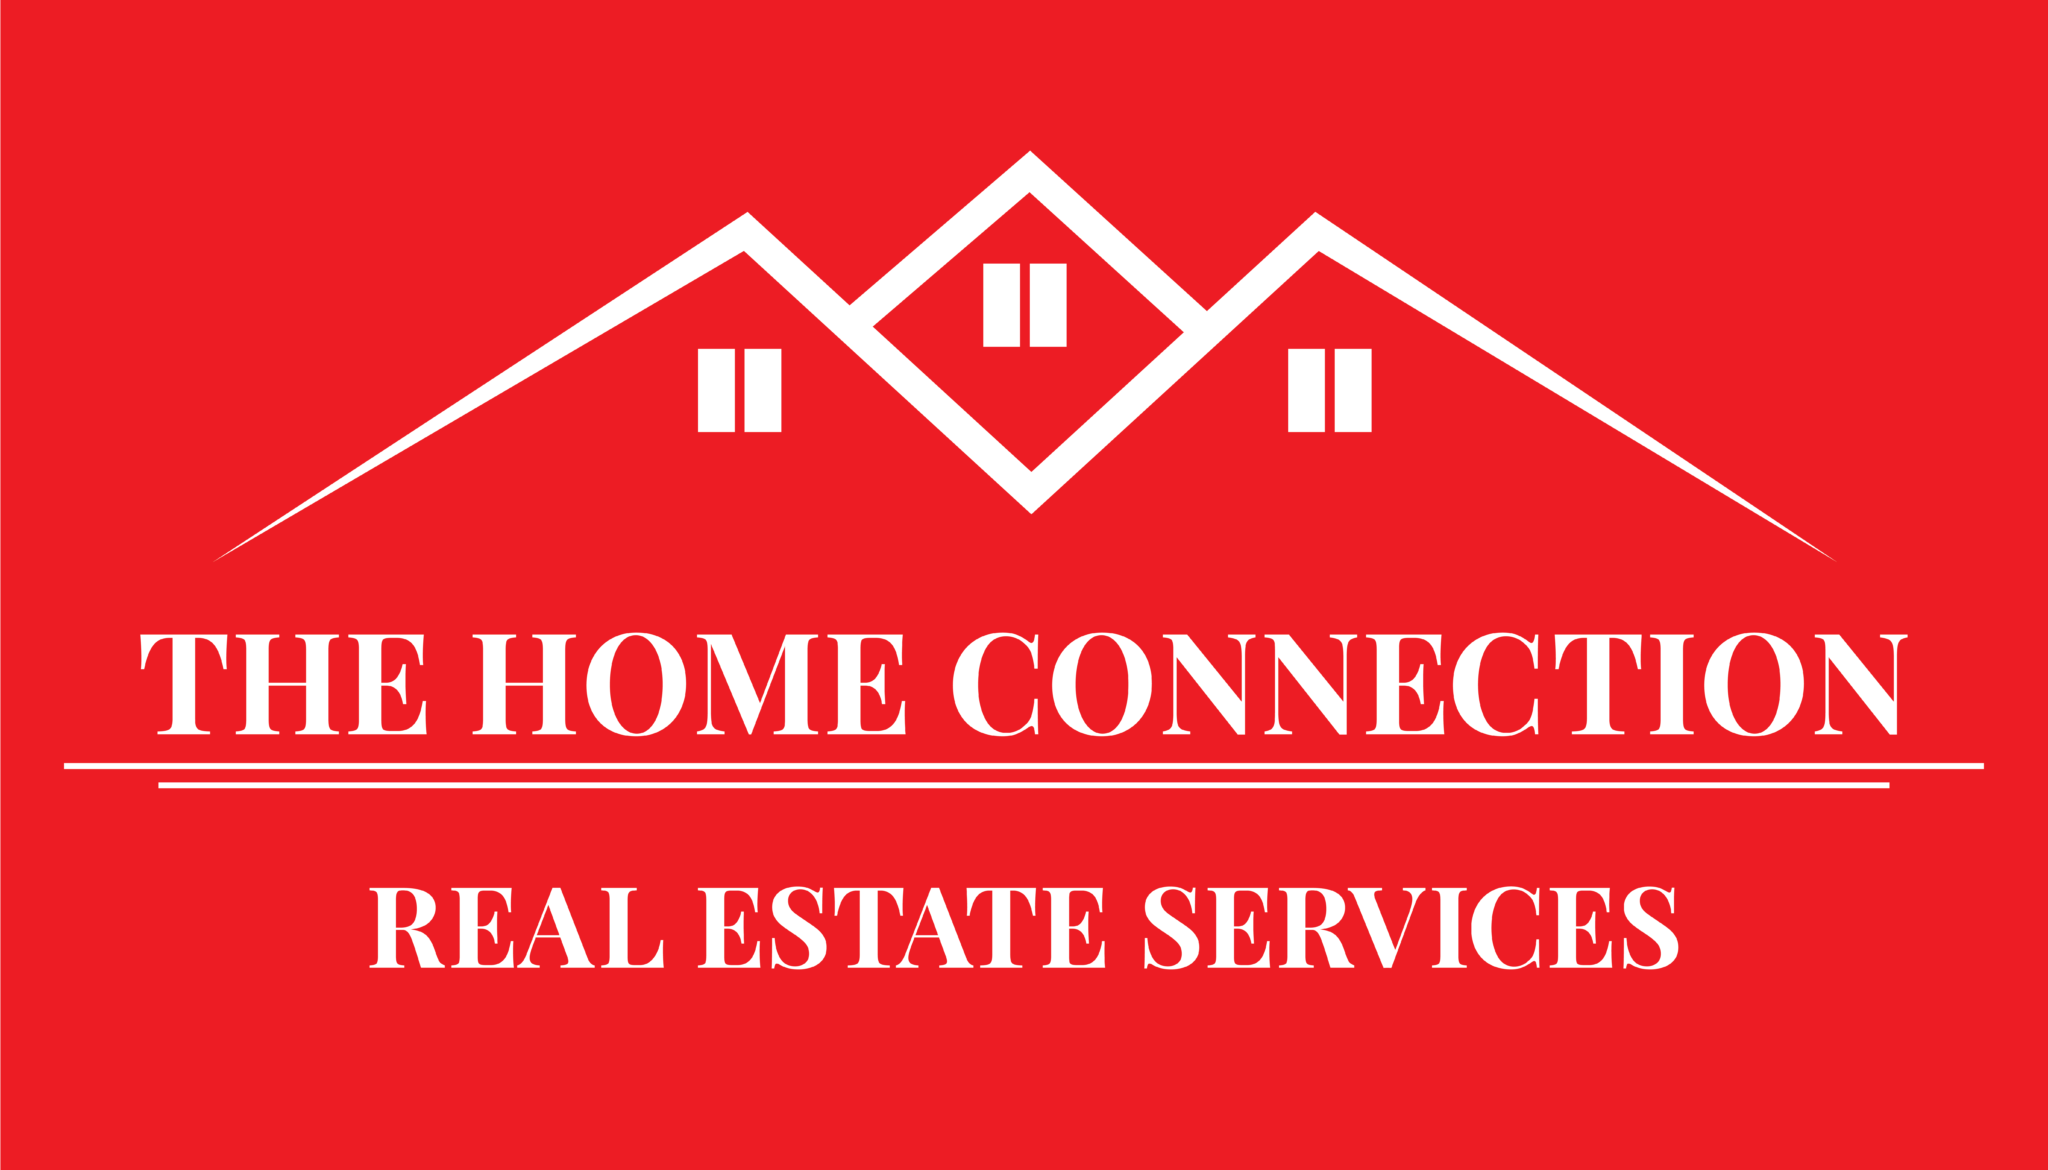 The Home Connection, LLC